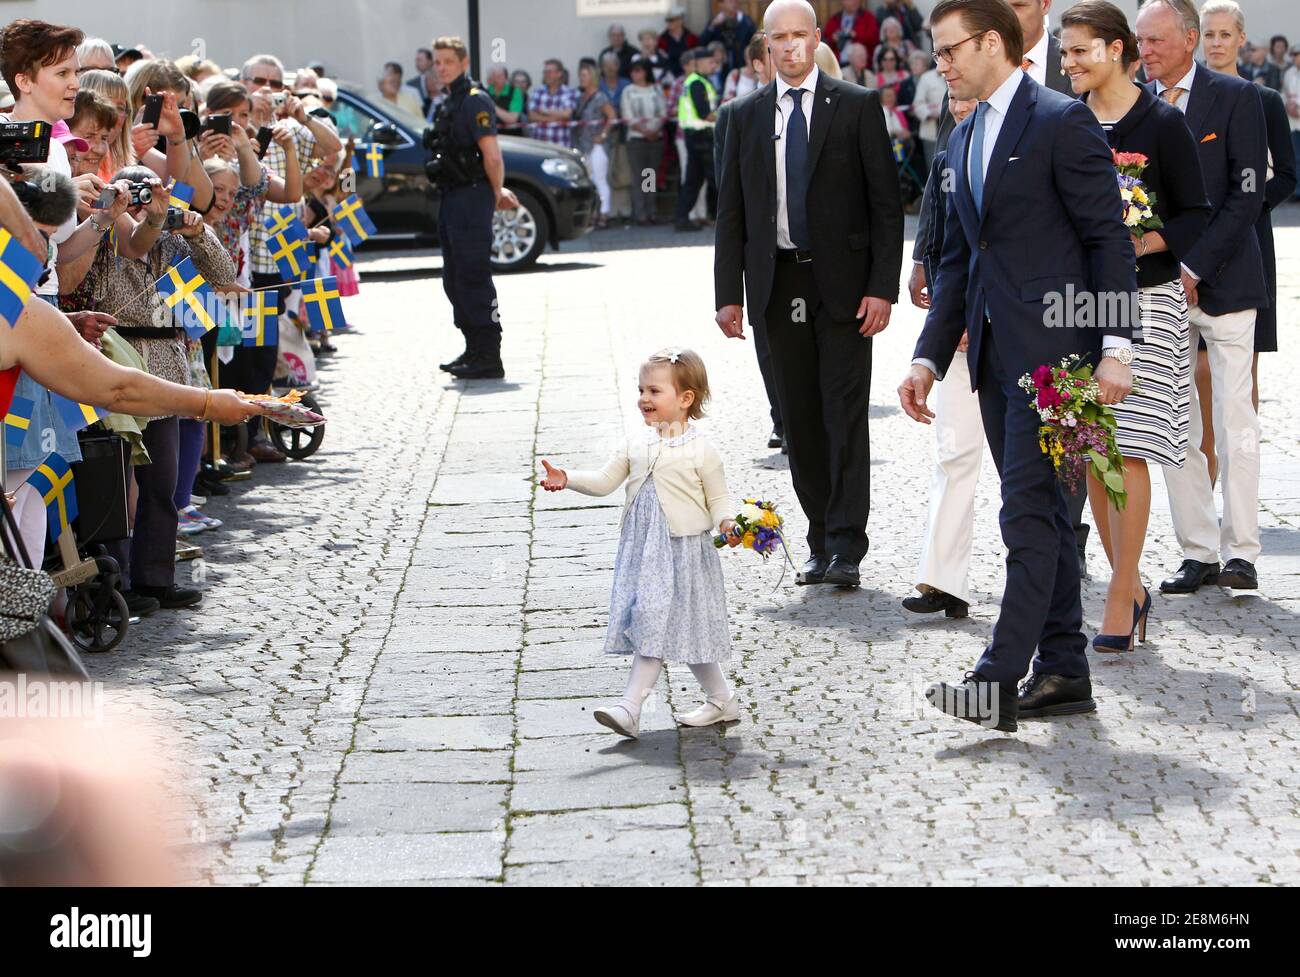 LINKÖPING, SWEDEN- 17 MAY 2014: Crown Princess Victoria, Prince Daniel and Princess Estelle are welcomed to Östergötland and Linköping Castle. Princess Estelle is Duchess of Östergötland and is visiting her landscape for the first time. Stock Photo